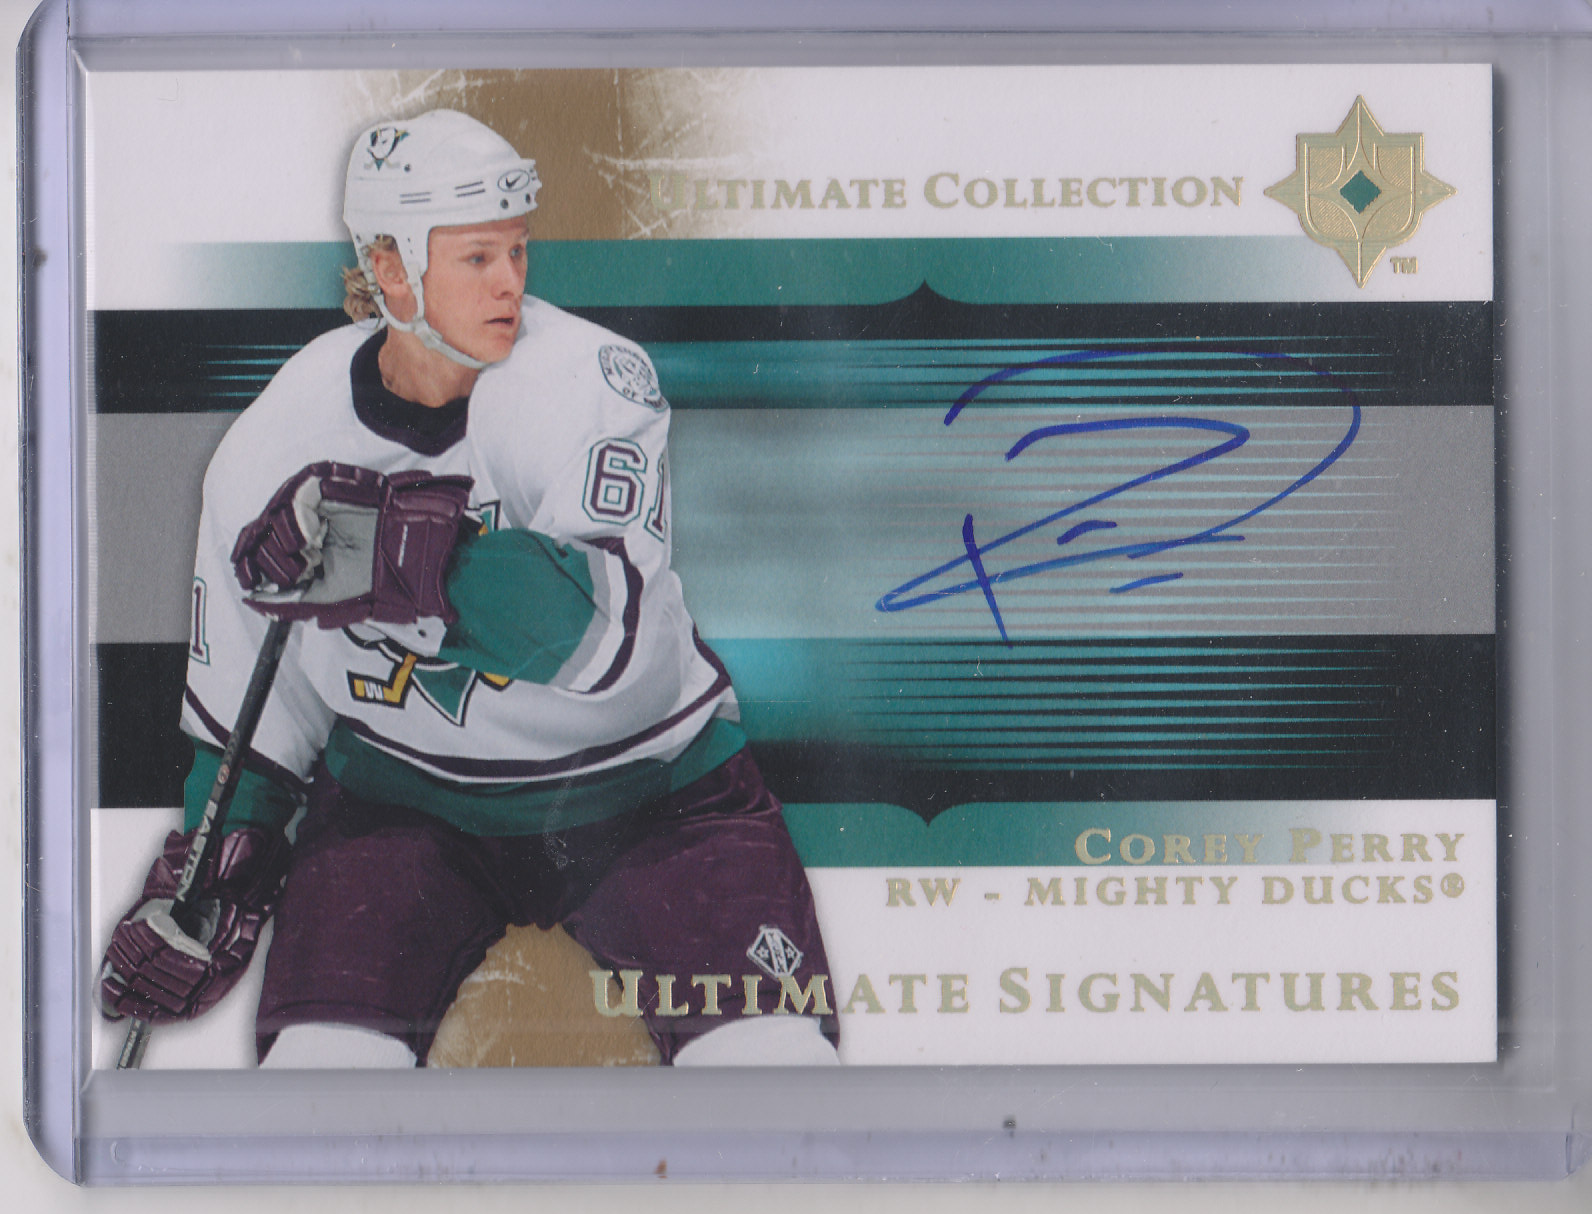 2005-06 Ultimate Collection Ultimate Signatures #USPY Corey Perry